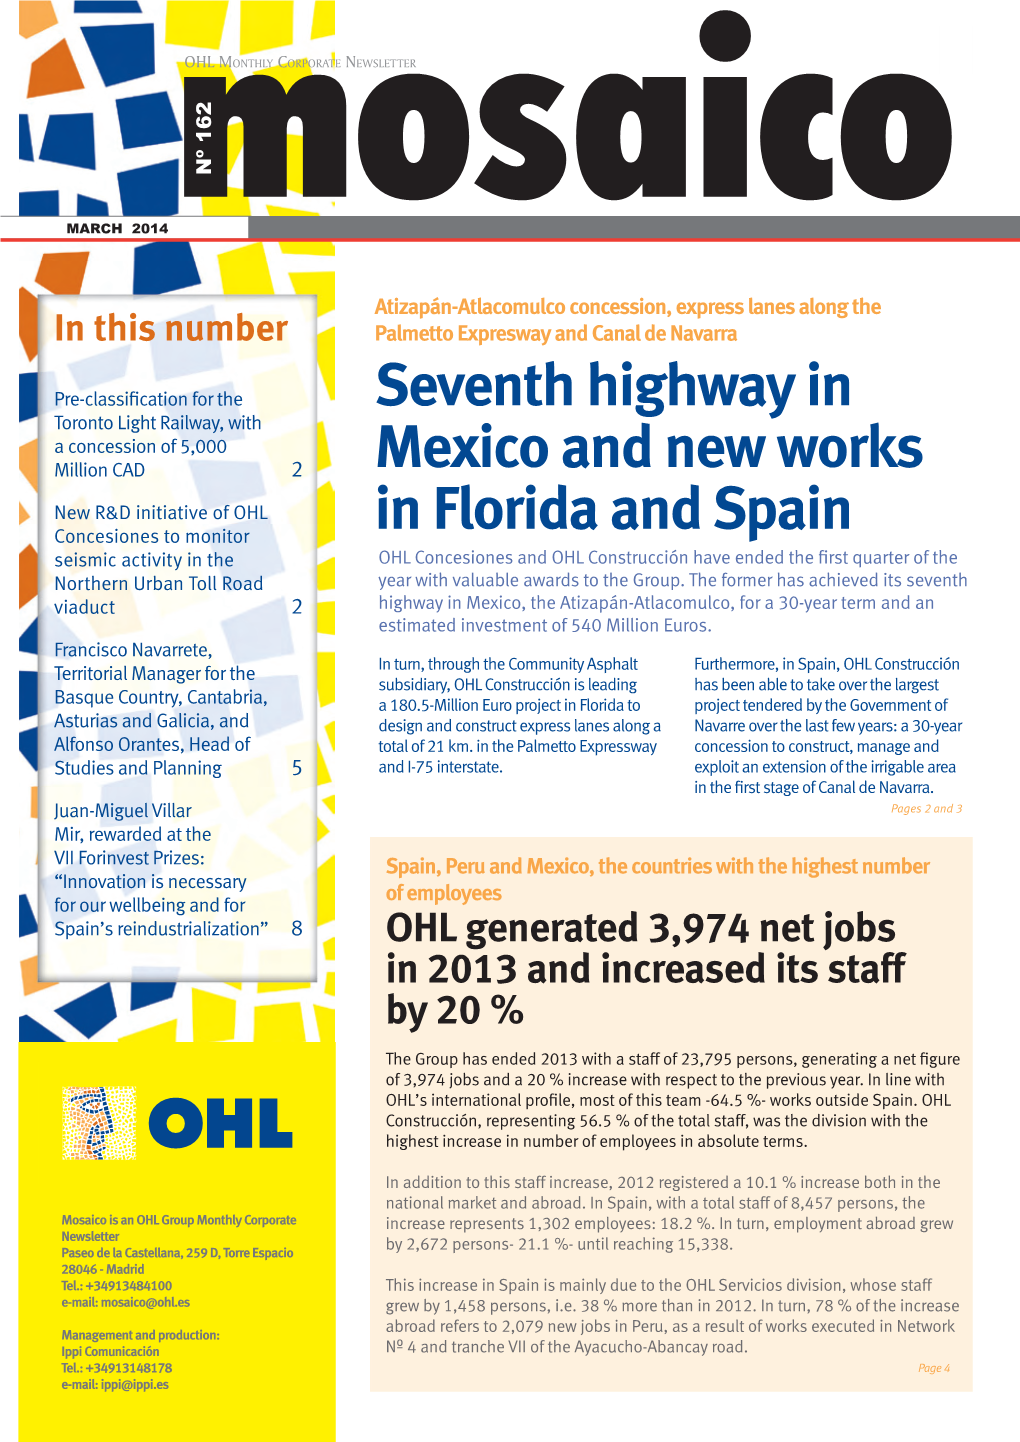 Seventh Highway in Mexico and New Works in Florida and Spain